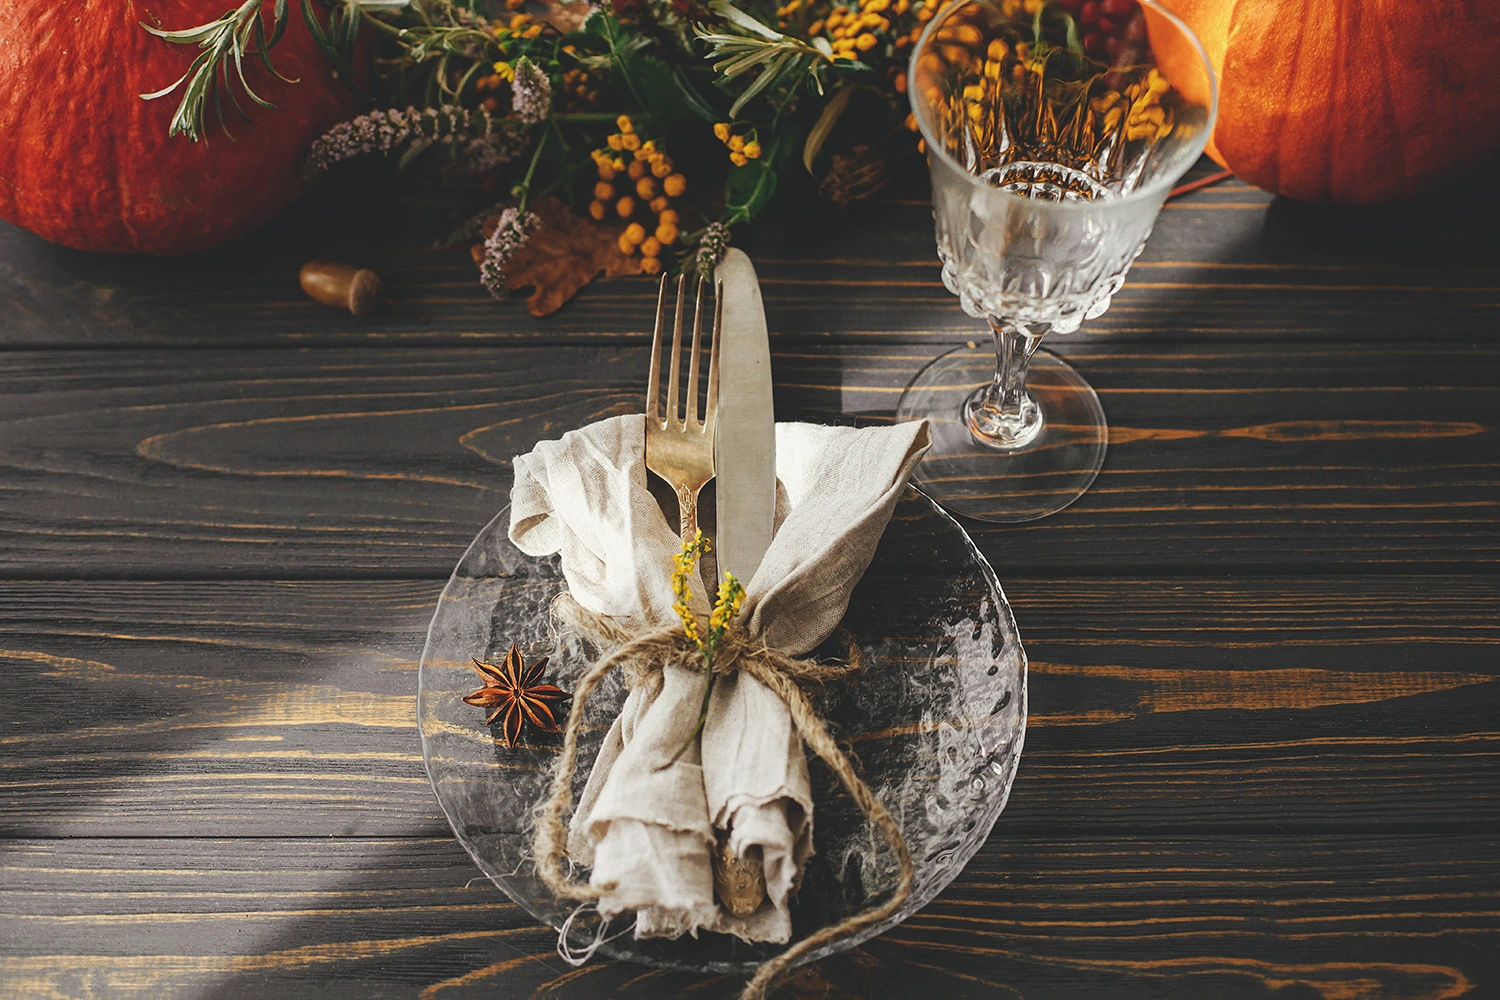 Thanksgiving table setting with a glass of wine and pumpkins for your restaurant's holiday menu.